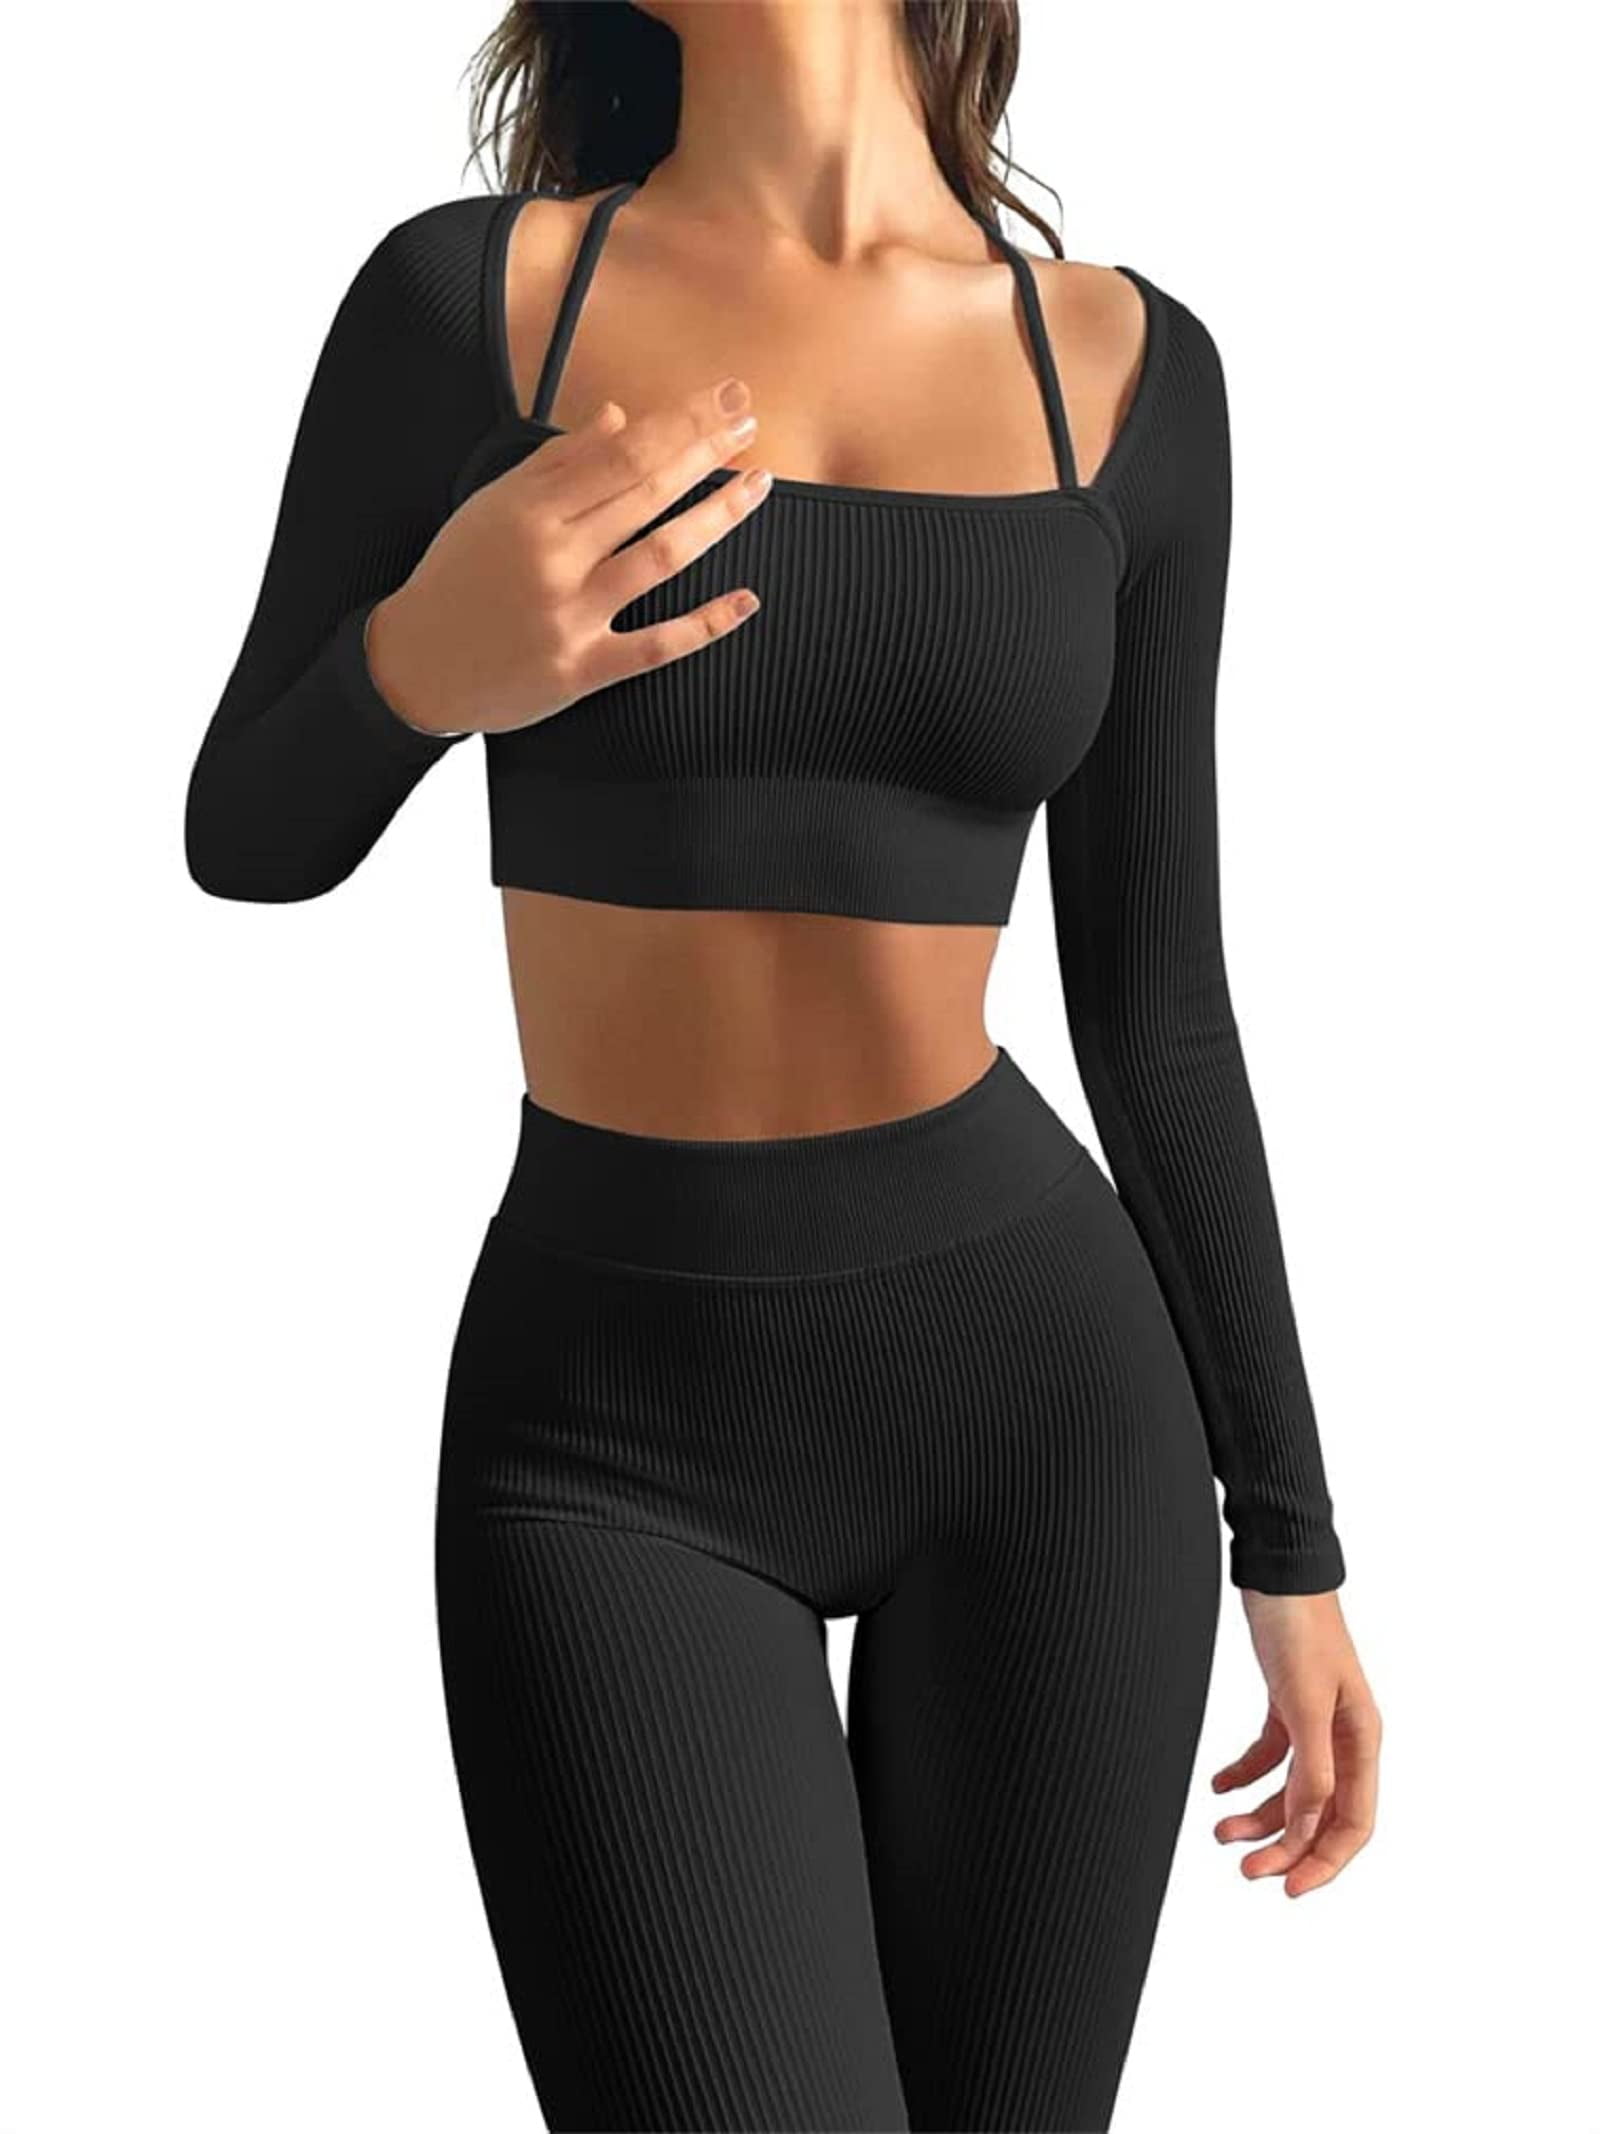 lanema Workout Outfits for Women 2 Piece Knit One Shoulder Sport Bras Crop  Top with High Waist Leggings Workout Sets